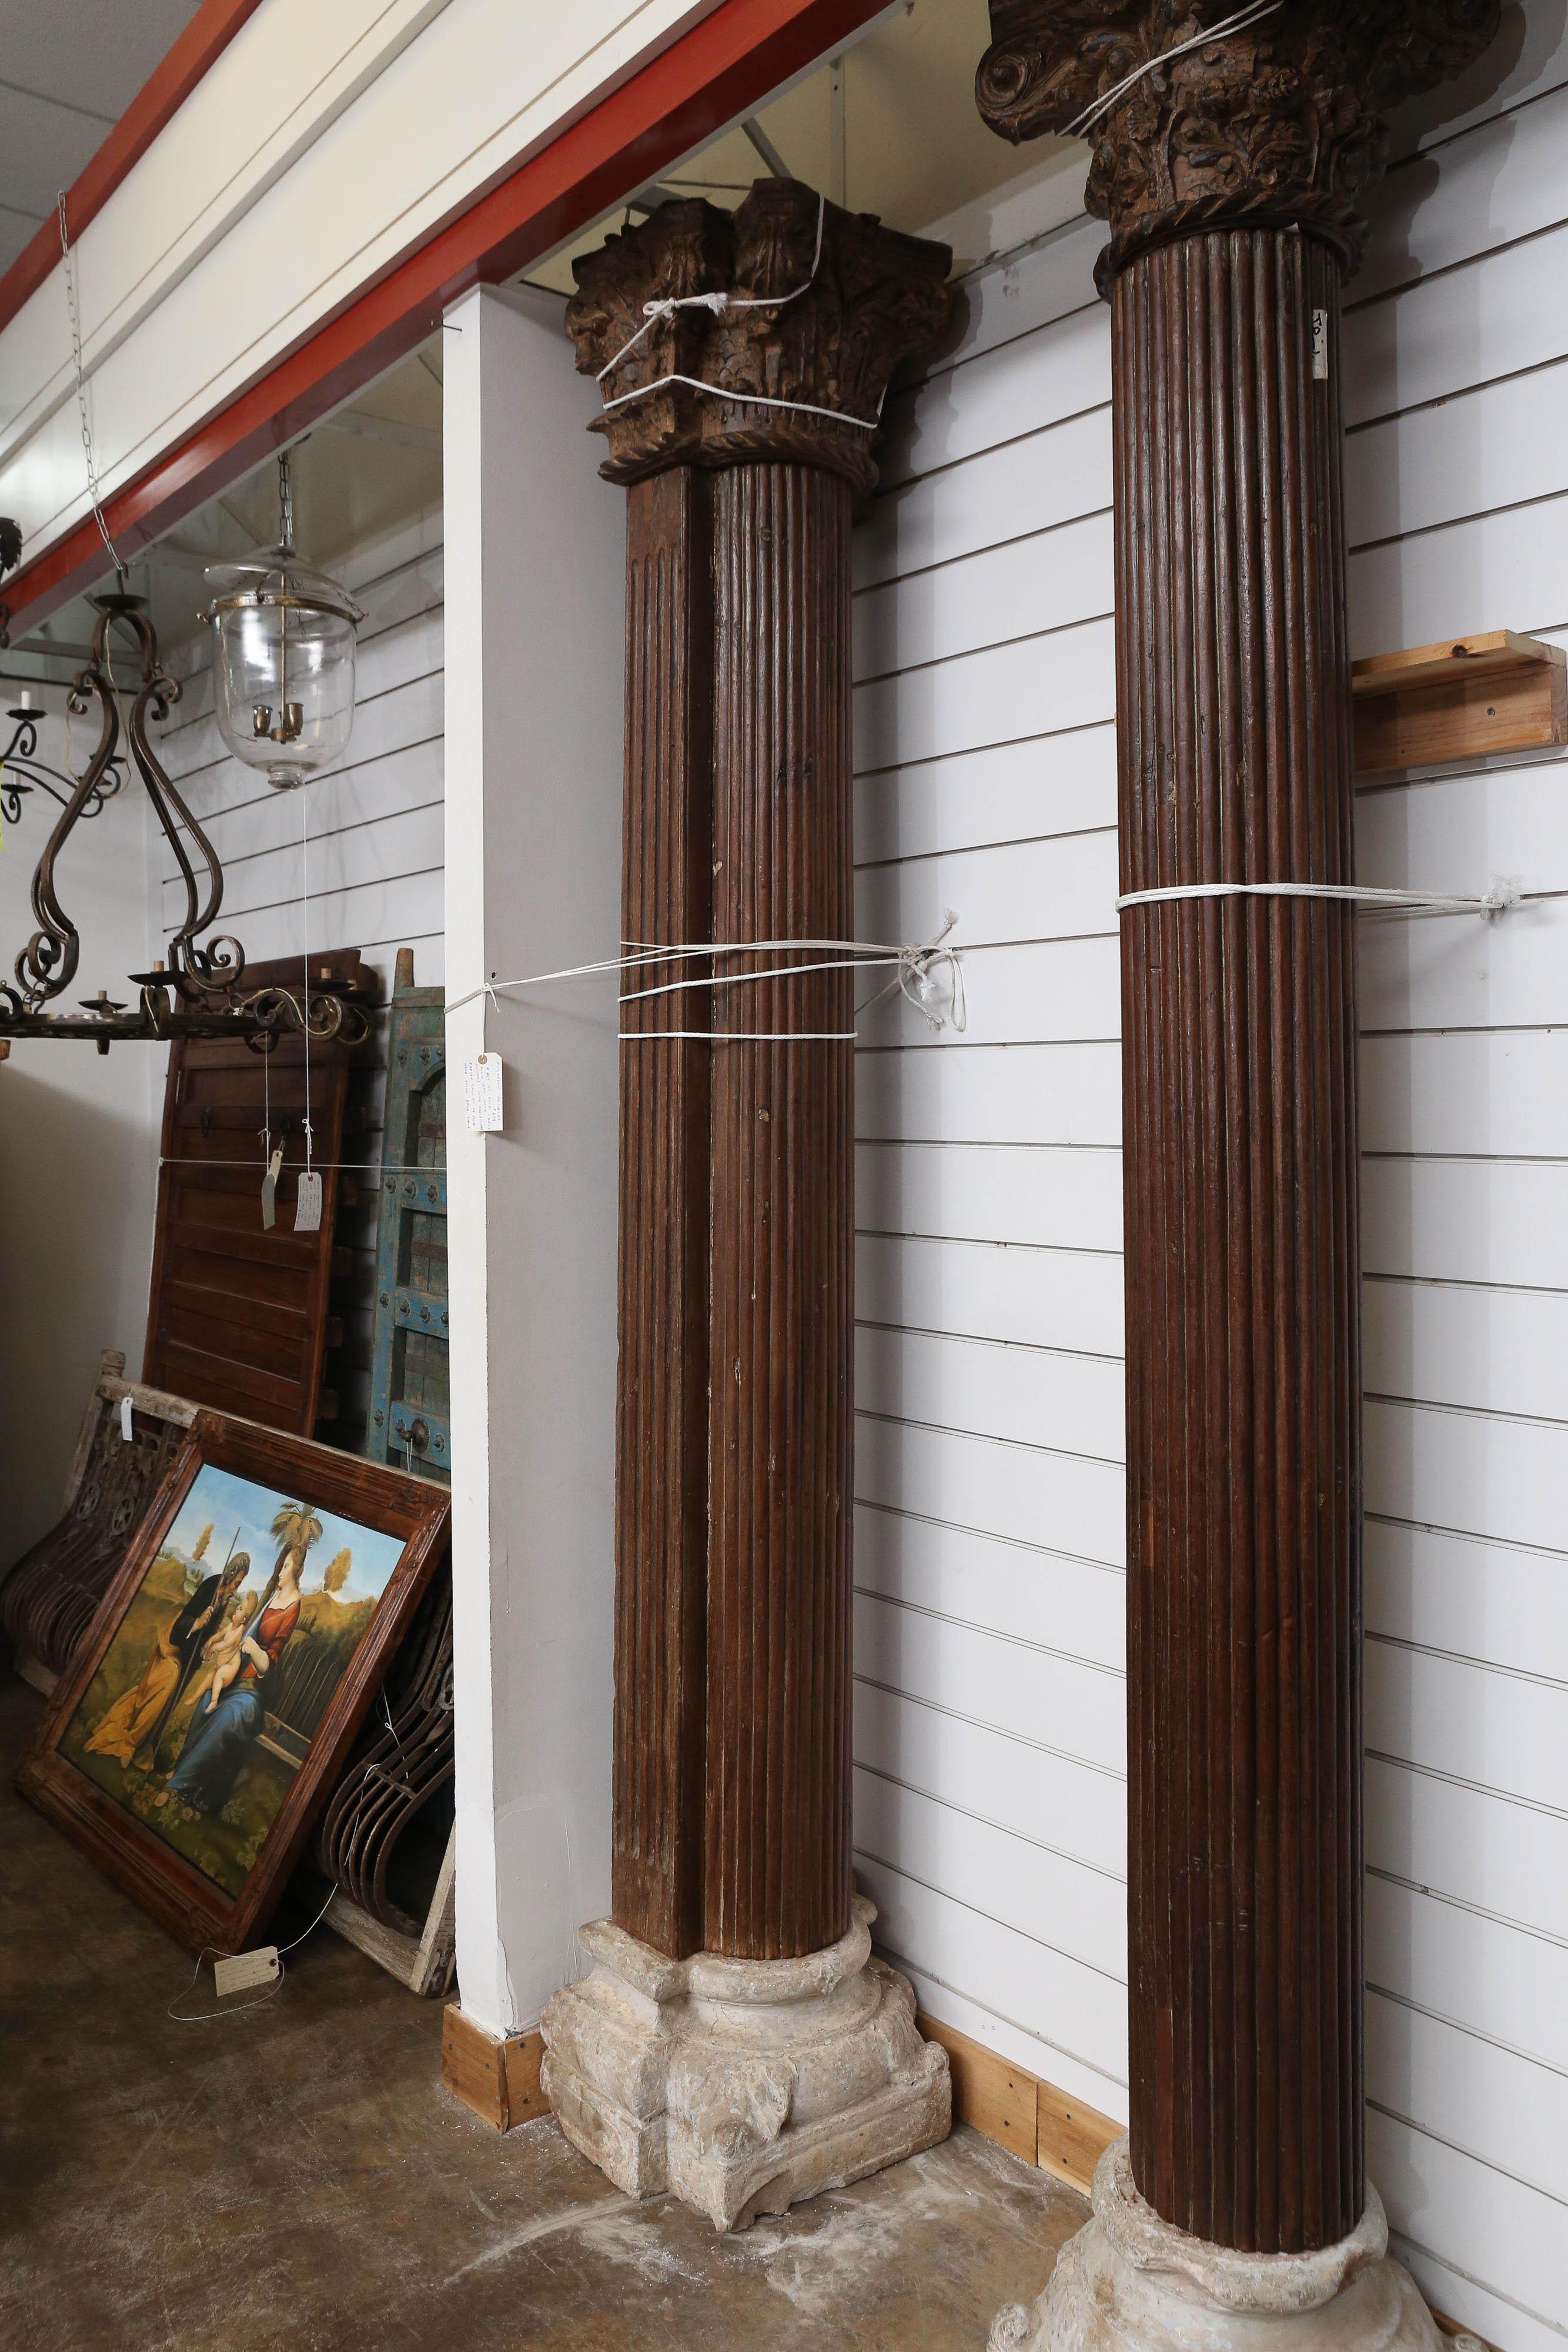 Indian Set of Four 1820s Monumental Load Bearing Columns from an Old Mansion from Goa. For Sale